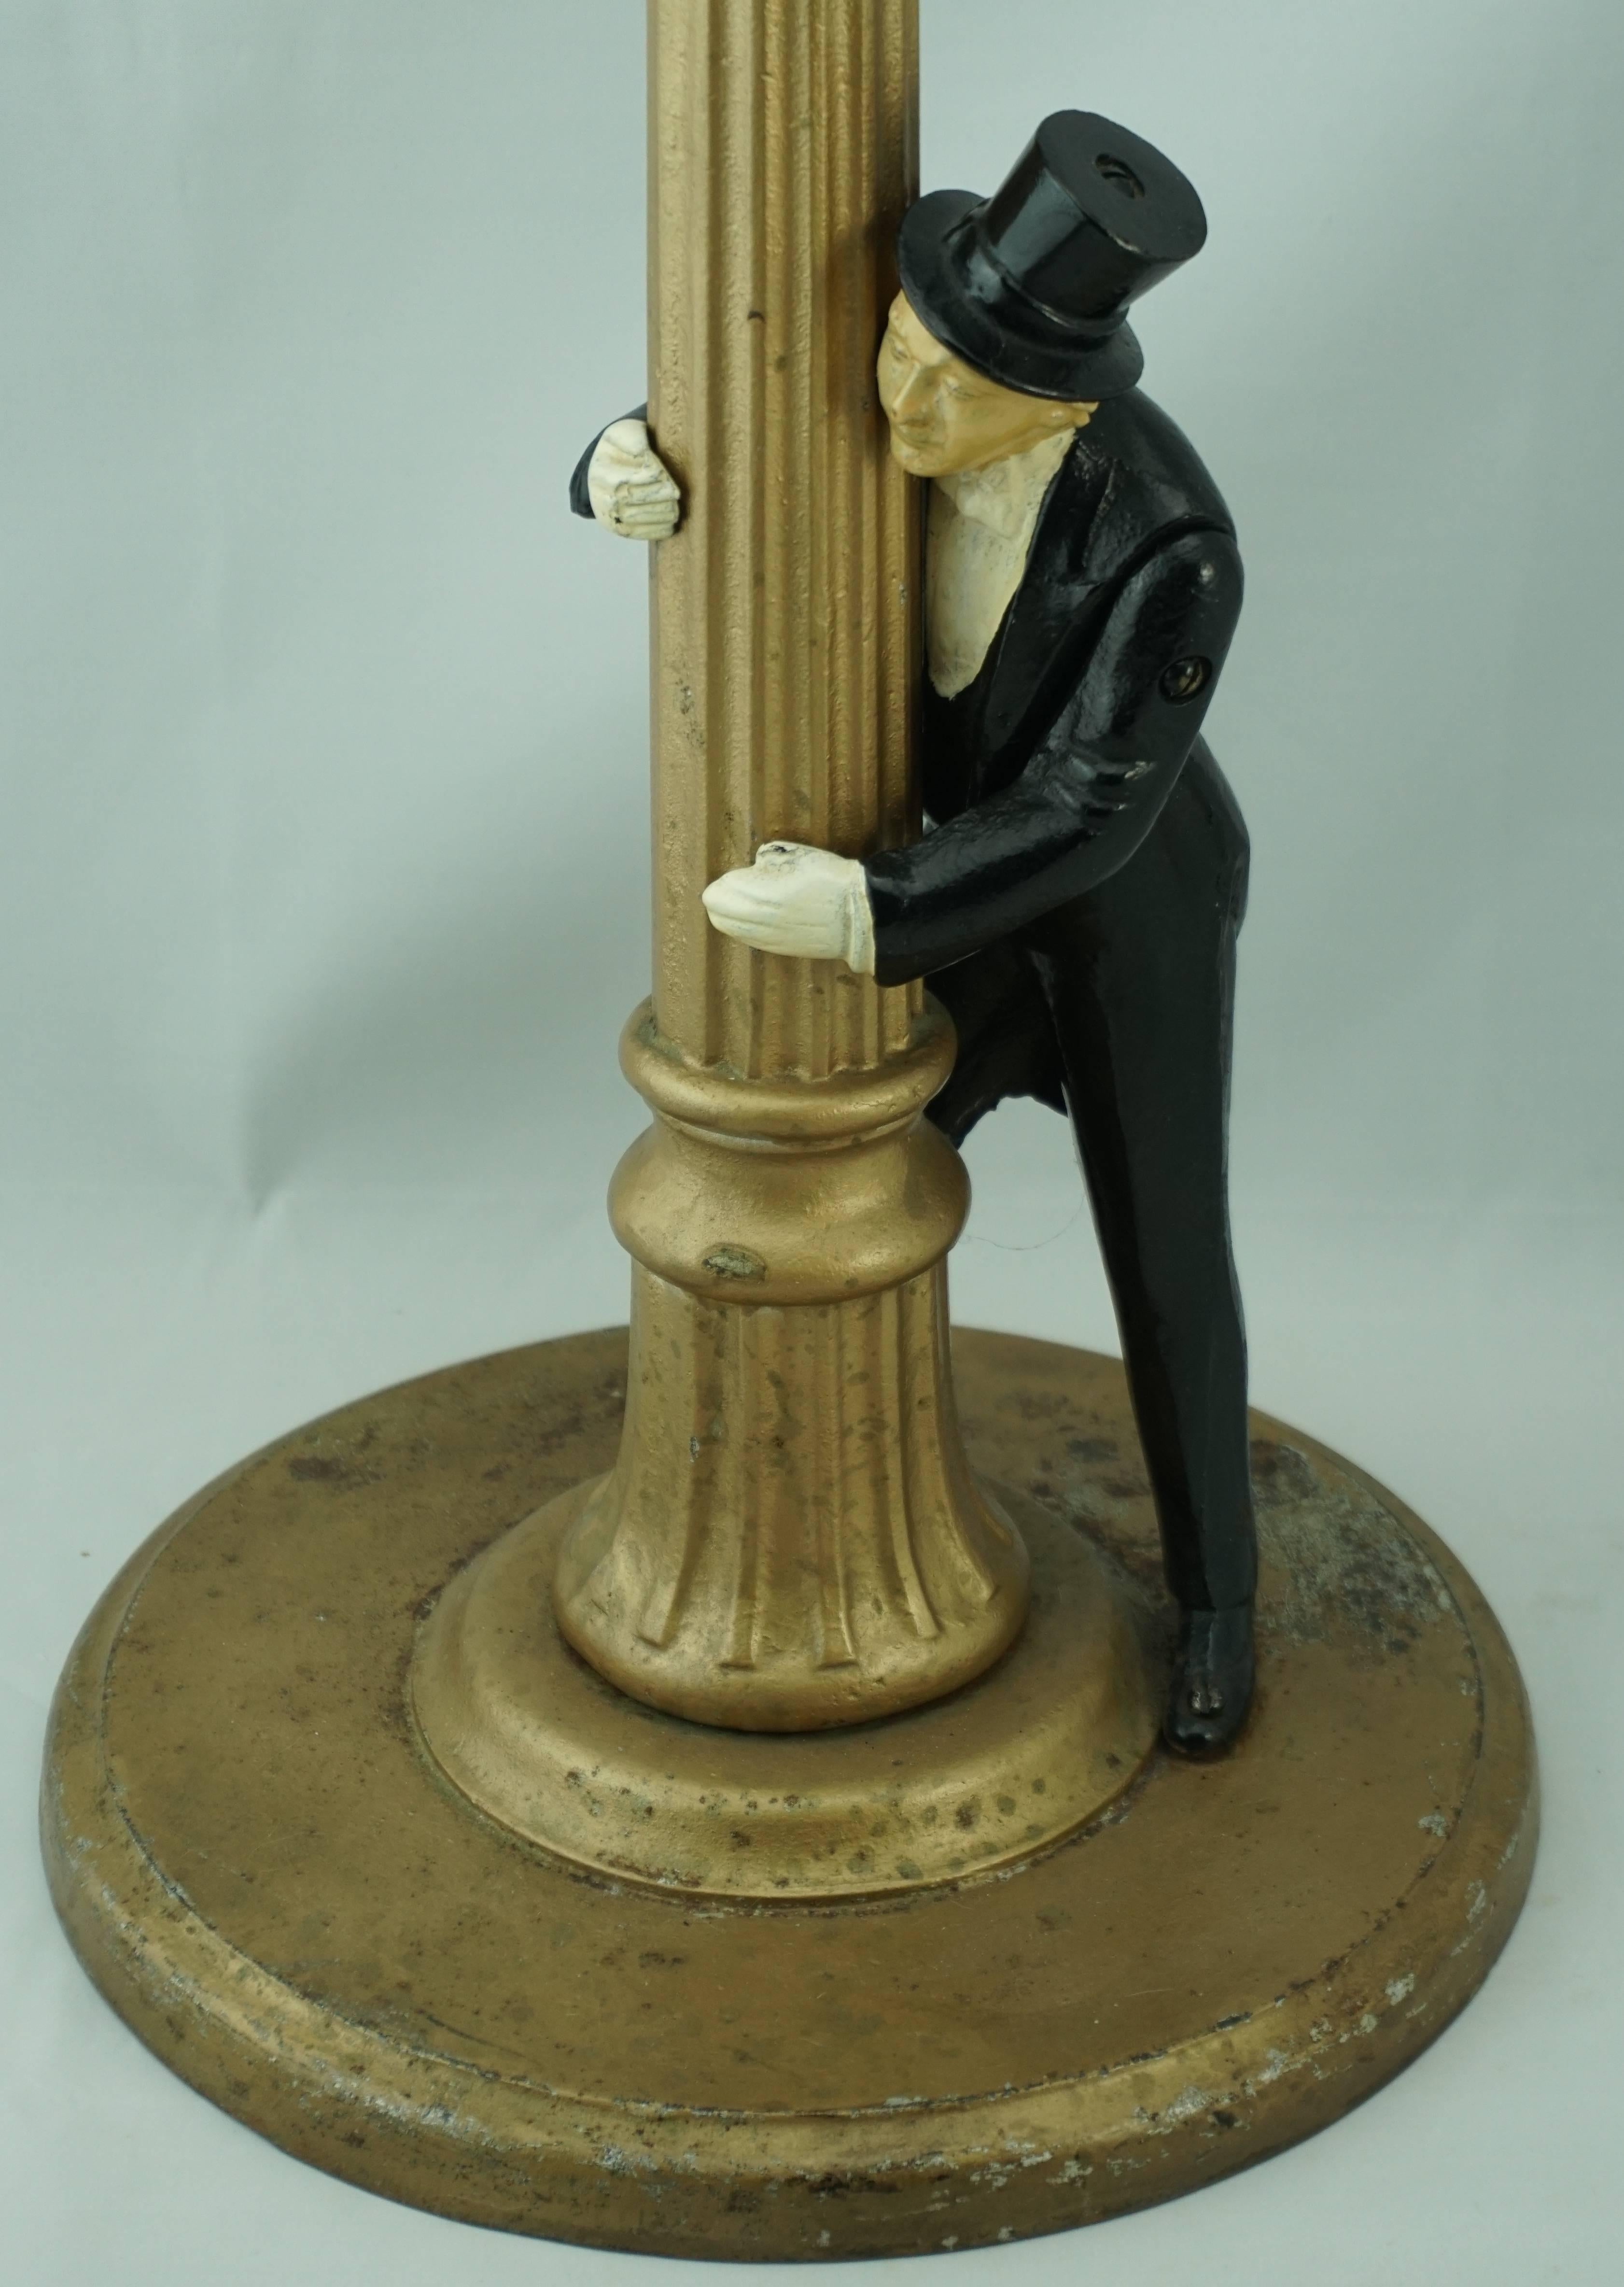 Art Deco American figural cast iron standing ashtray, having a gentleman in top hat and tuxedo tails leaning against the fluted column Stand, with glass ashtray liner. The base marked, 